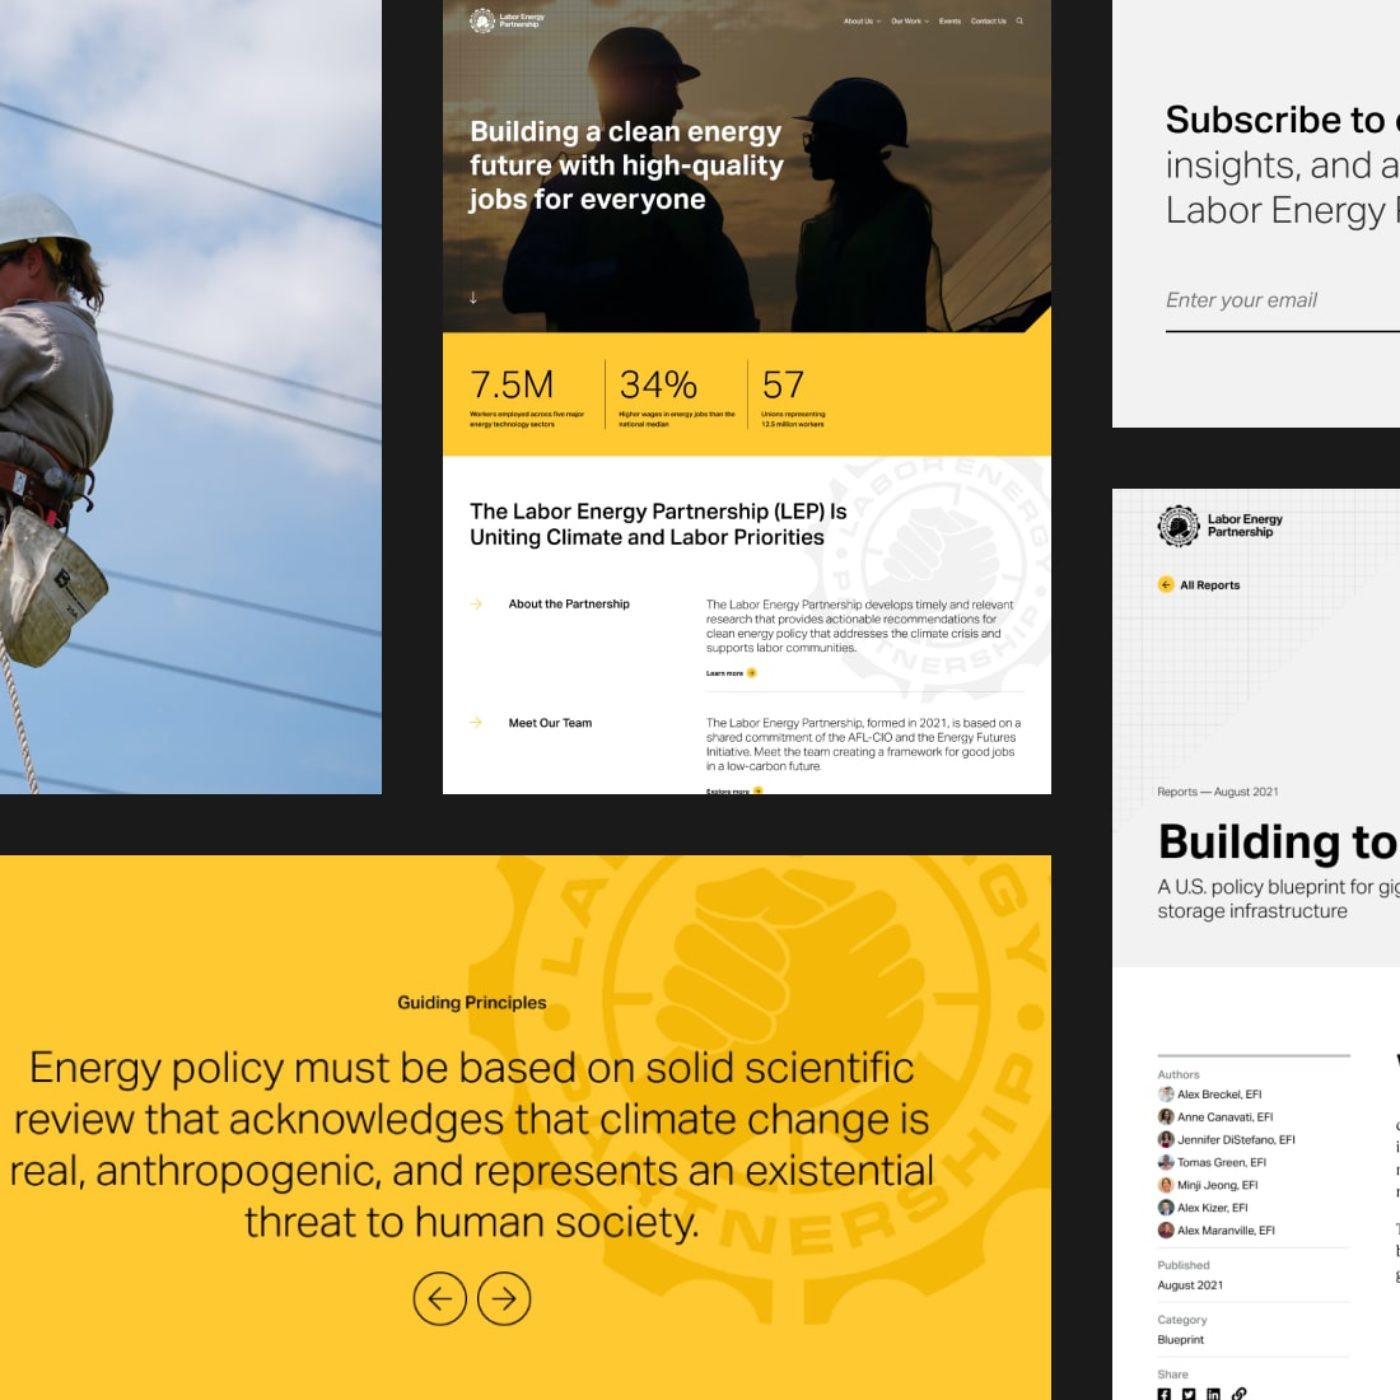 Interface images for labor energy partnership's website